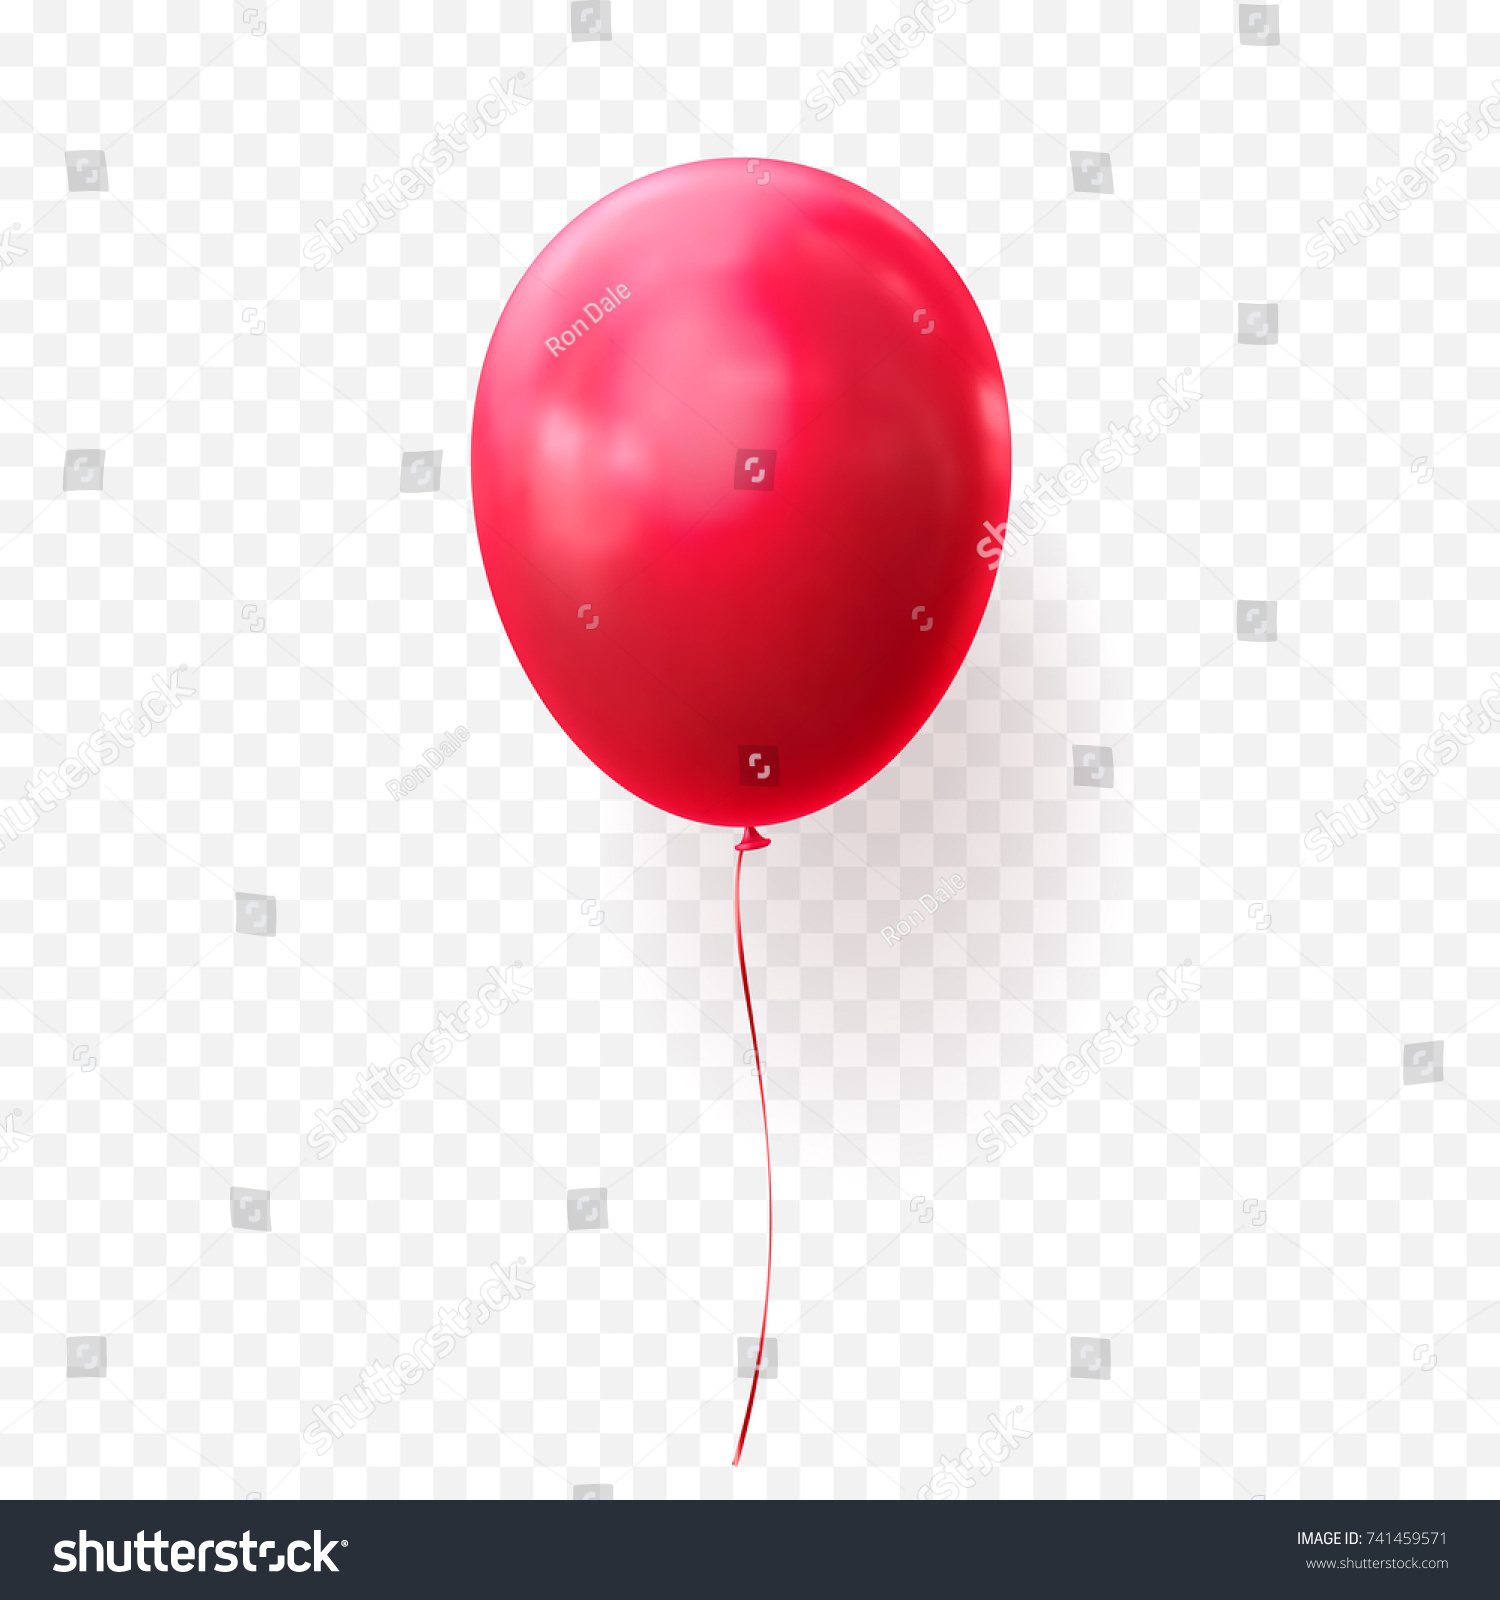 Red Balloon Vector Illustration On Transparent Stock Vector (Royalty